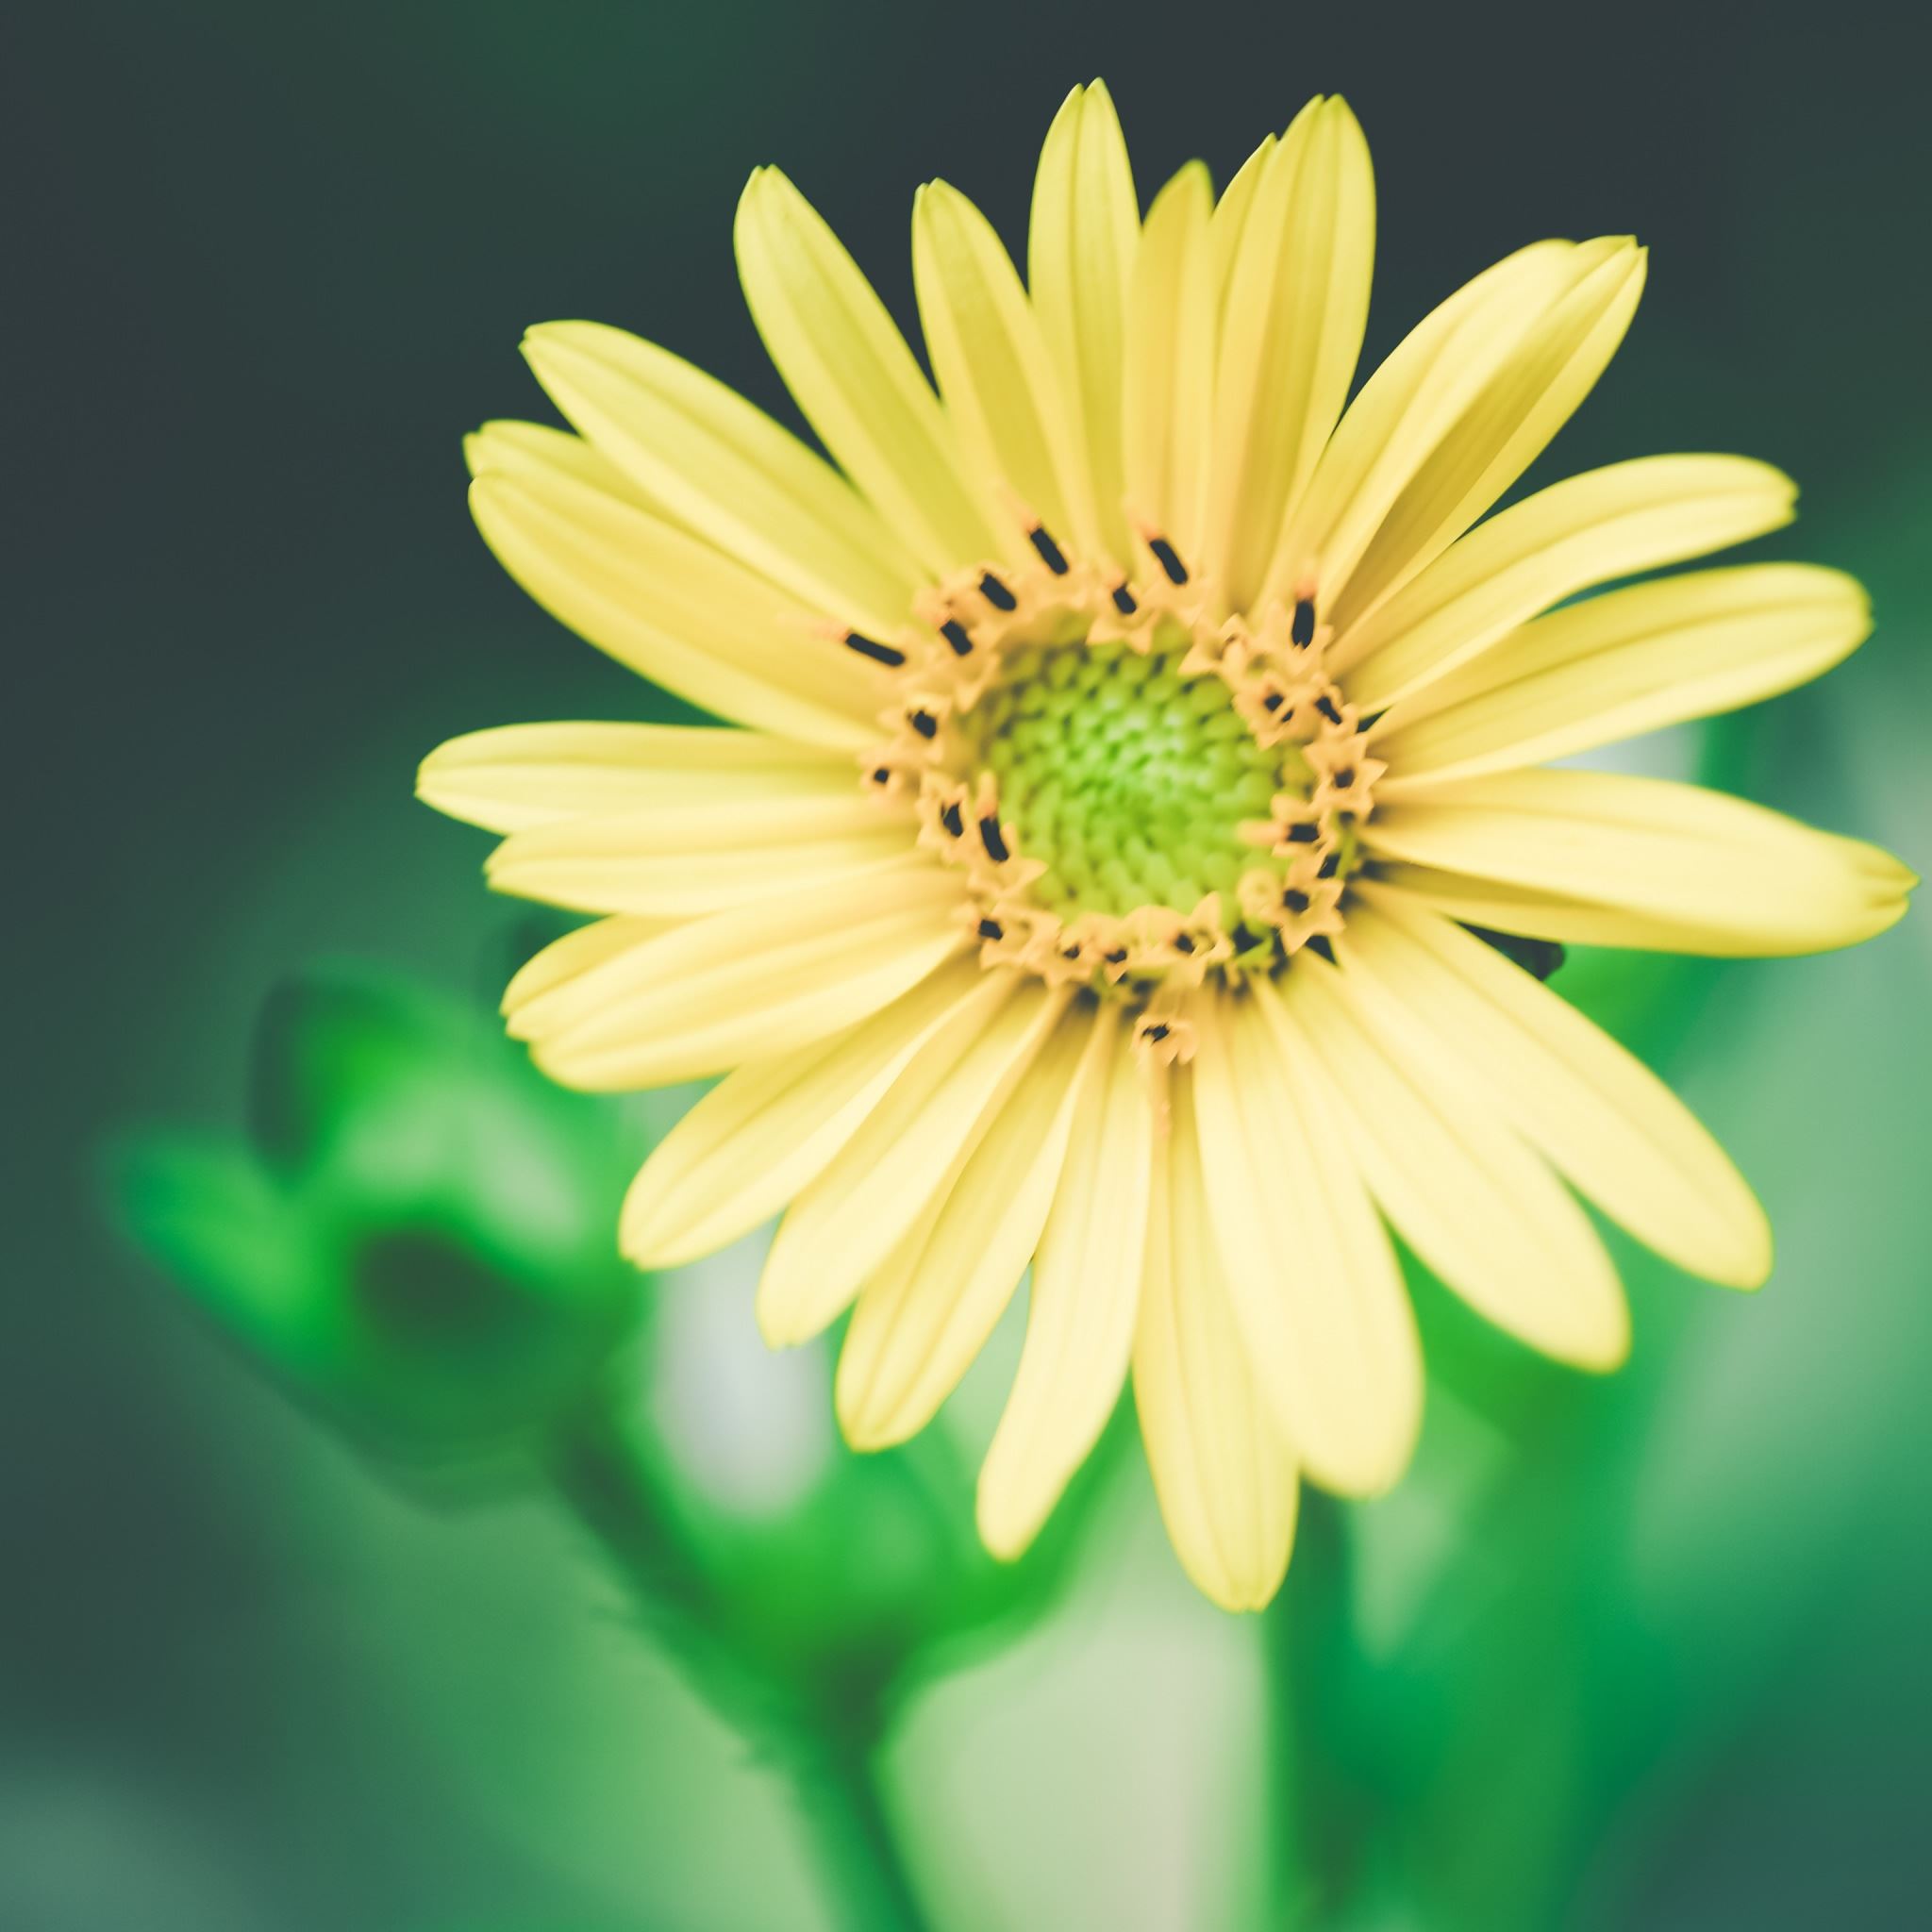 Unsaturated Yellow Flower iPad Air wallpaper 